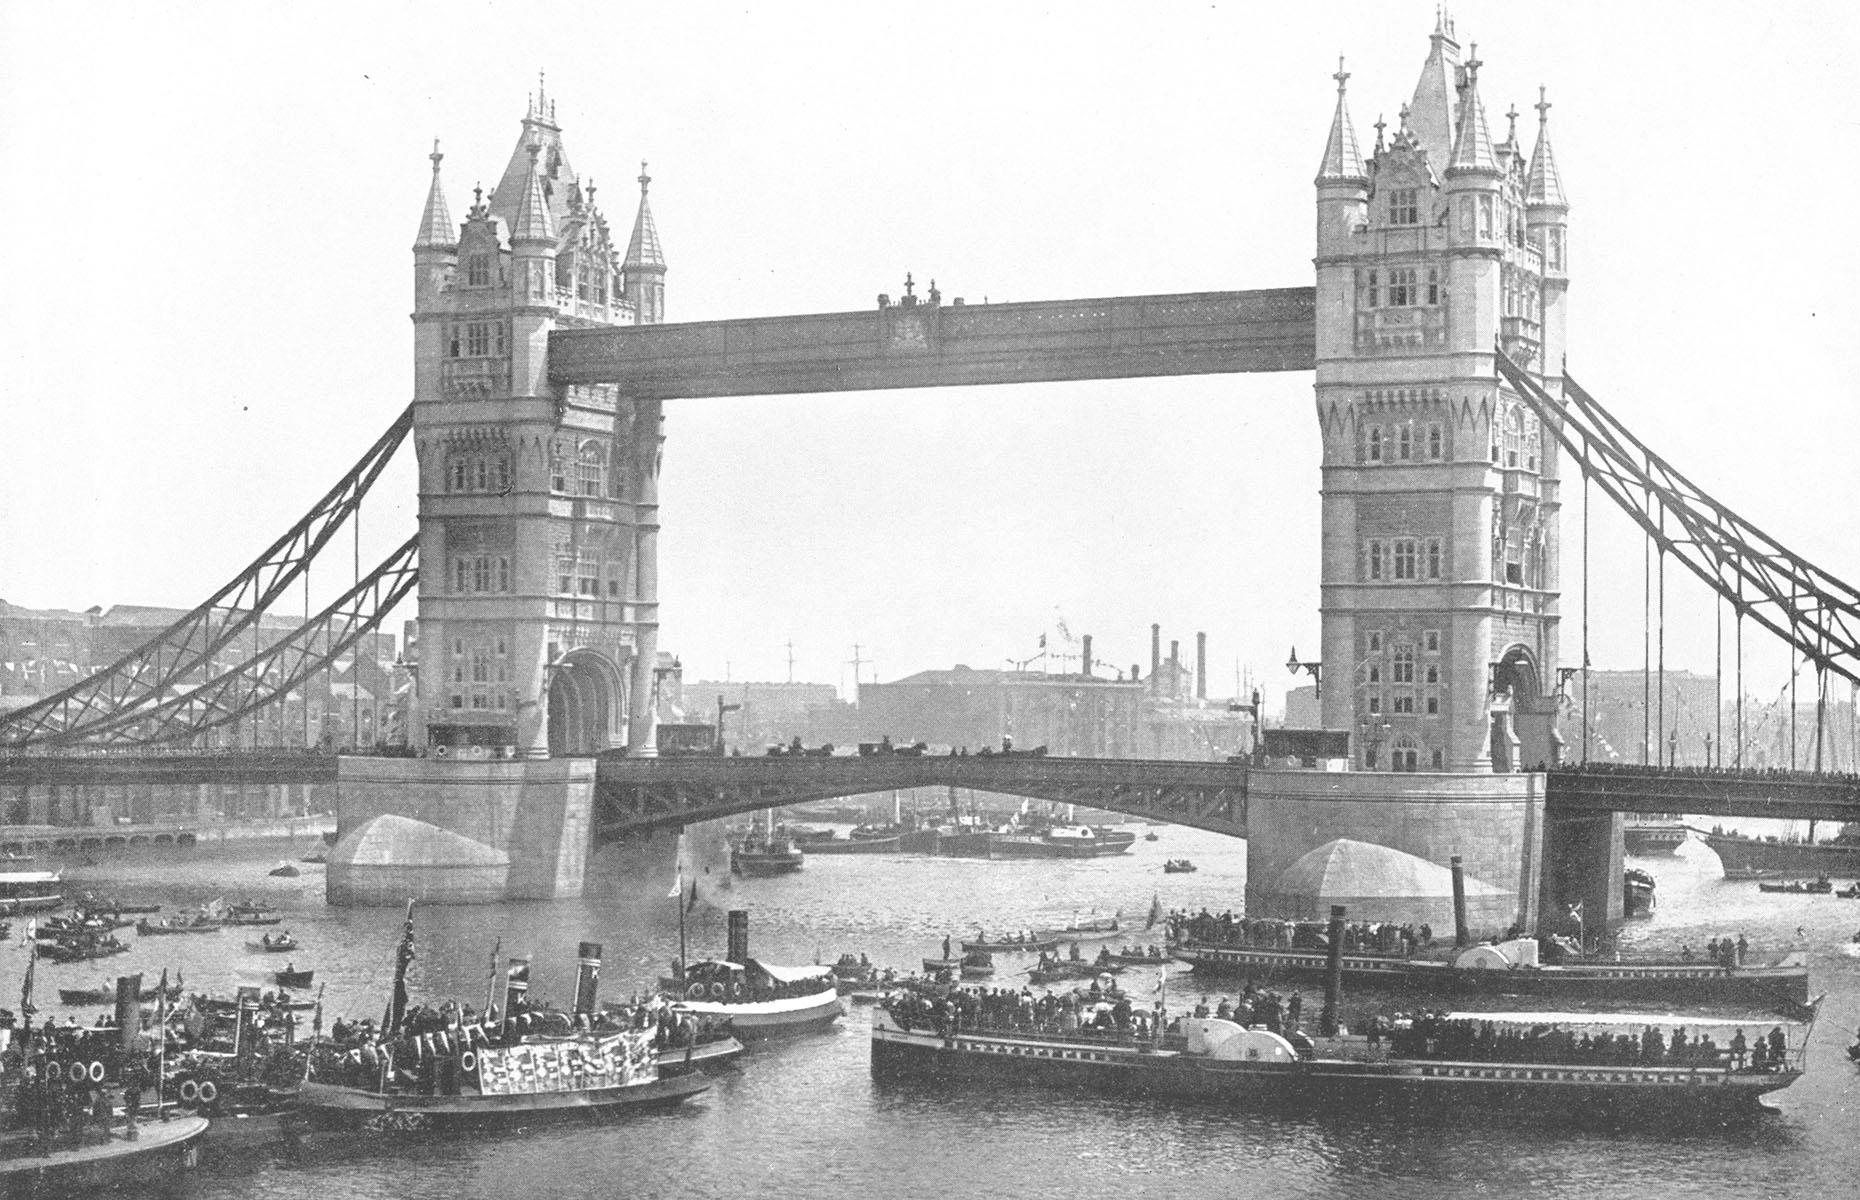 <p>Tower Bridge in London is such an iconic part of the fabric of the English capital that it is hard to believe that it was only opened in 1894. Here we see the grand structure on the day of its inauguration on 30 June, when it was declared open by the Prince and Princess of Wales with great celebrations. It remains one of the most recognizable – and most photographed – attractions in London.</p>